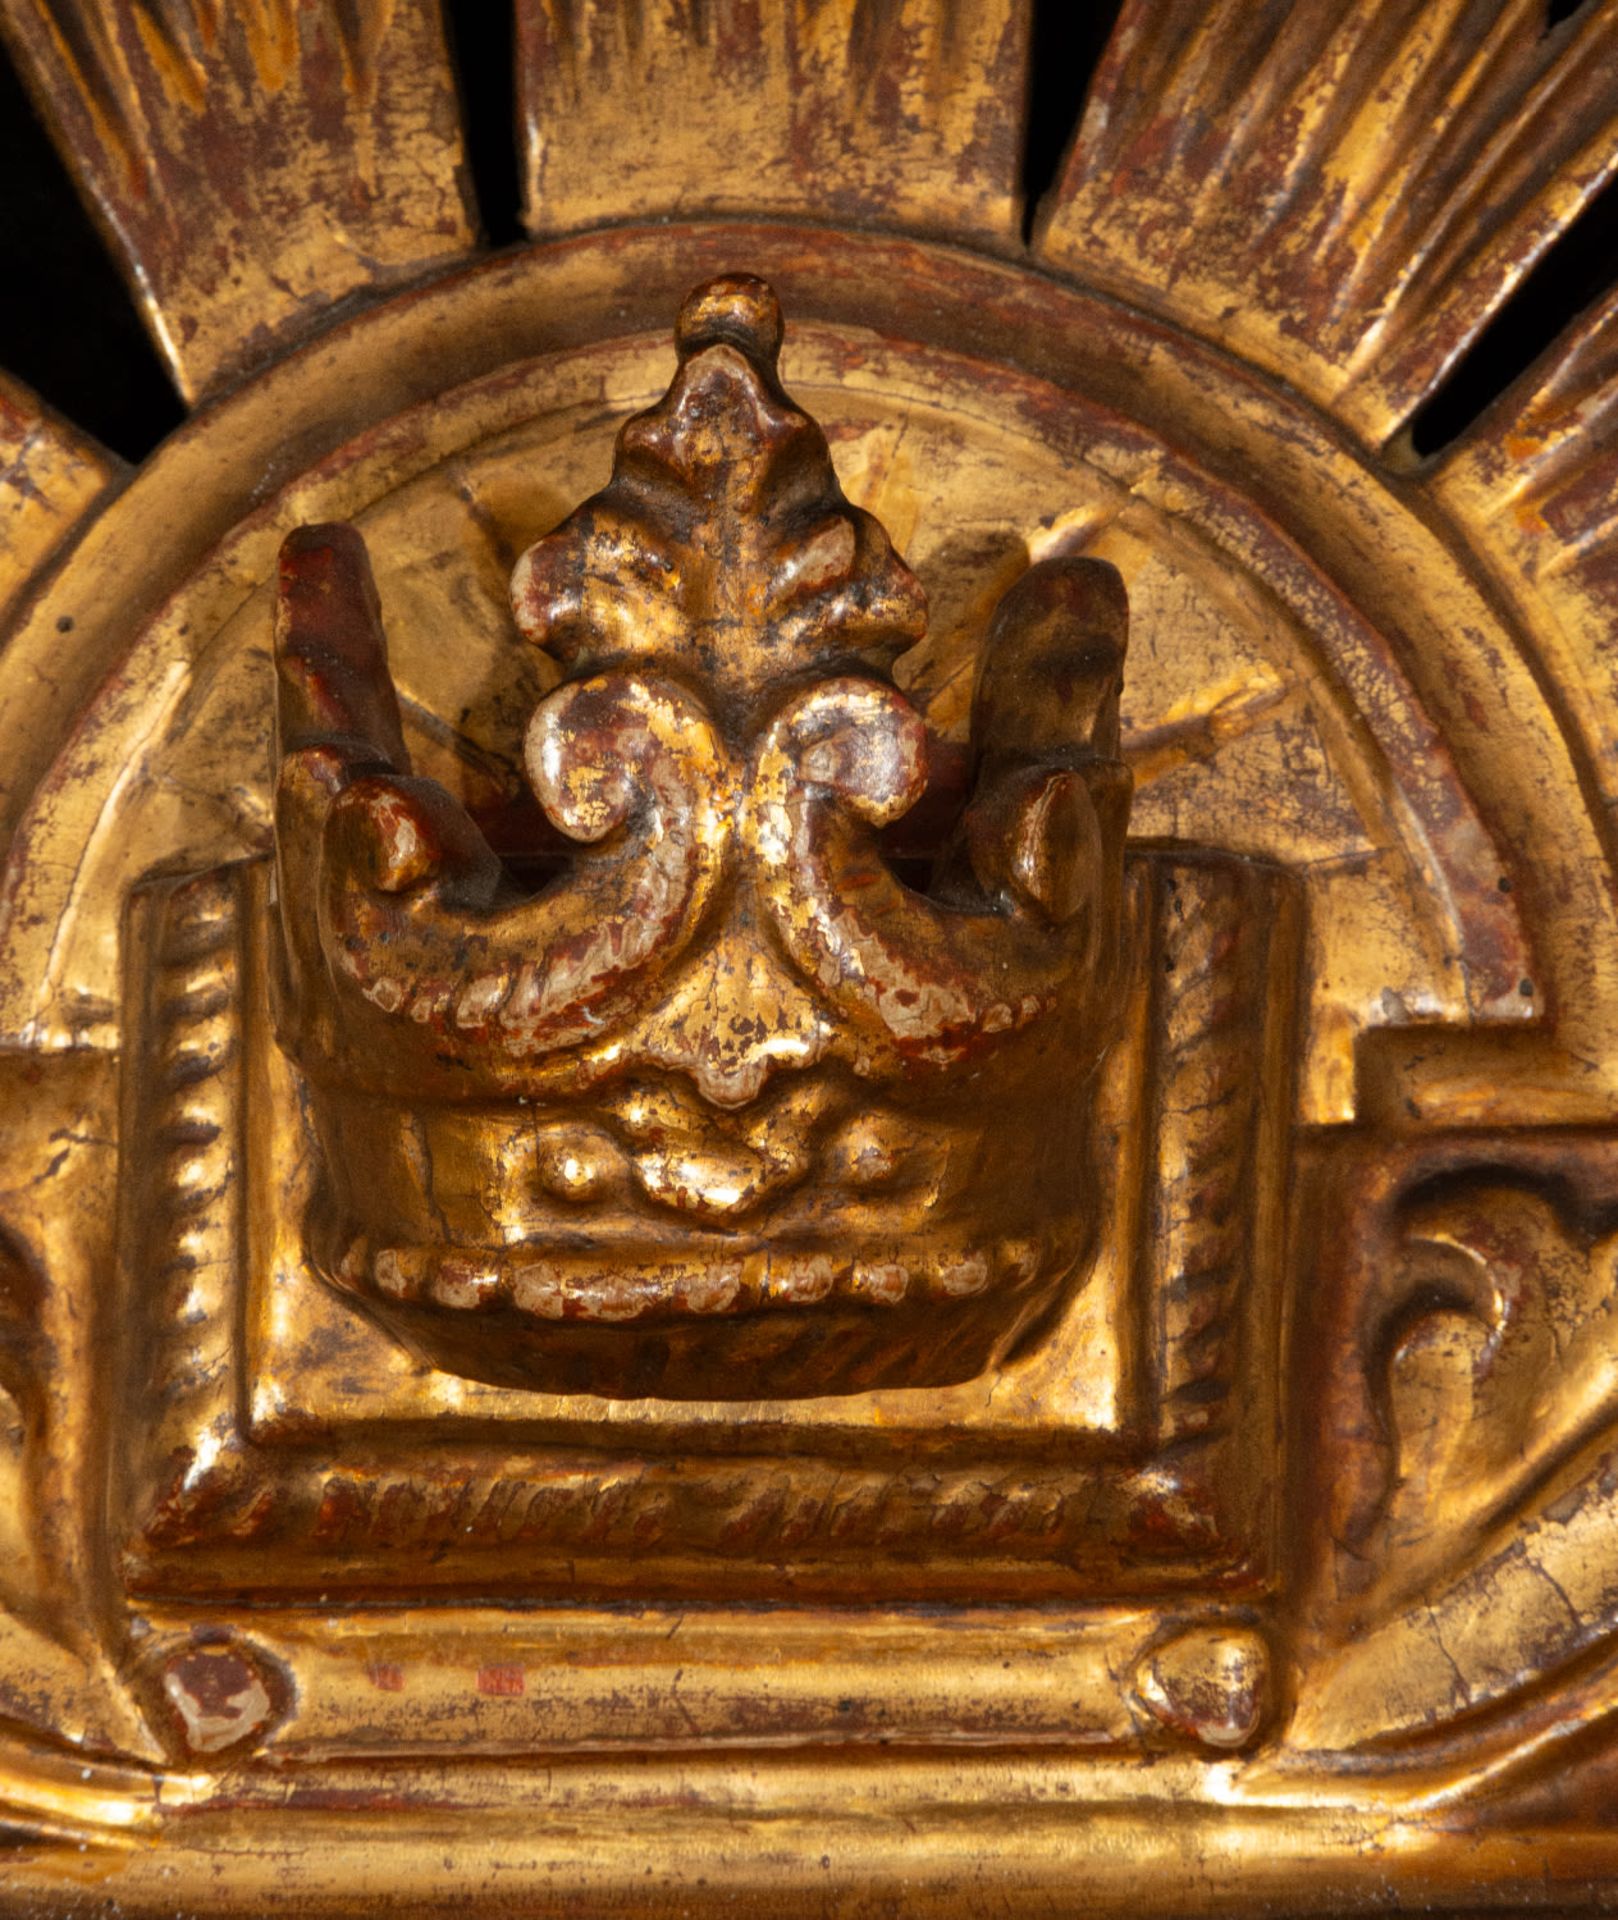 Cornucopia frame from the 17th century in polychrome and gilded wood relief with gold leaf - Image 6 of 8